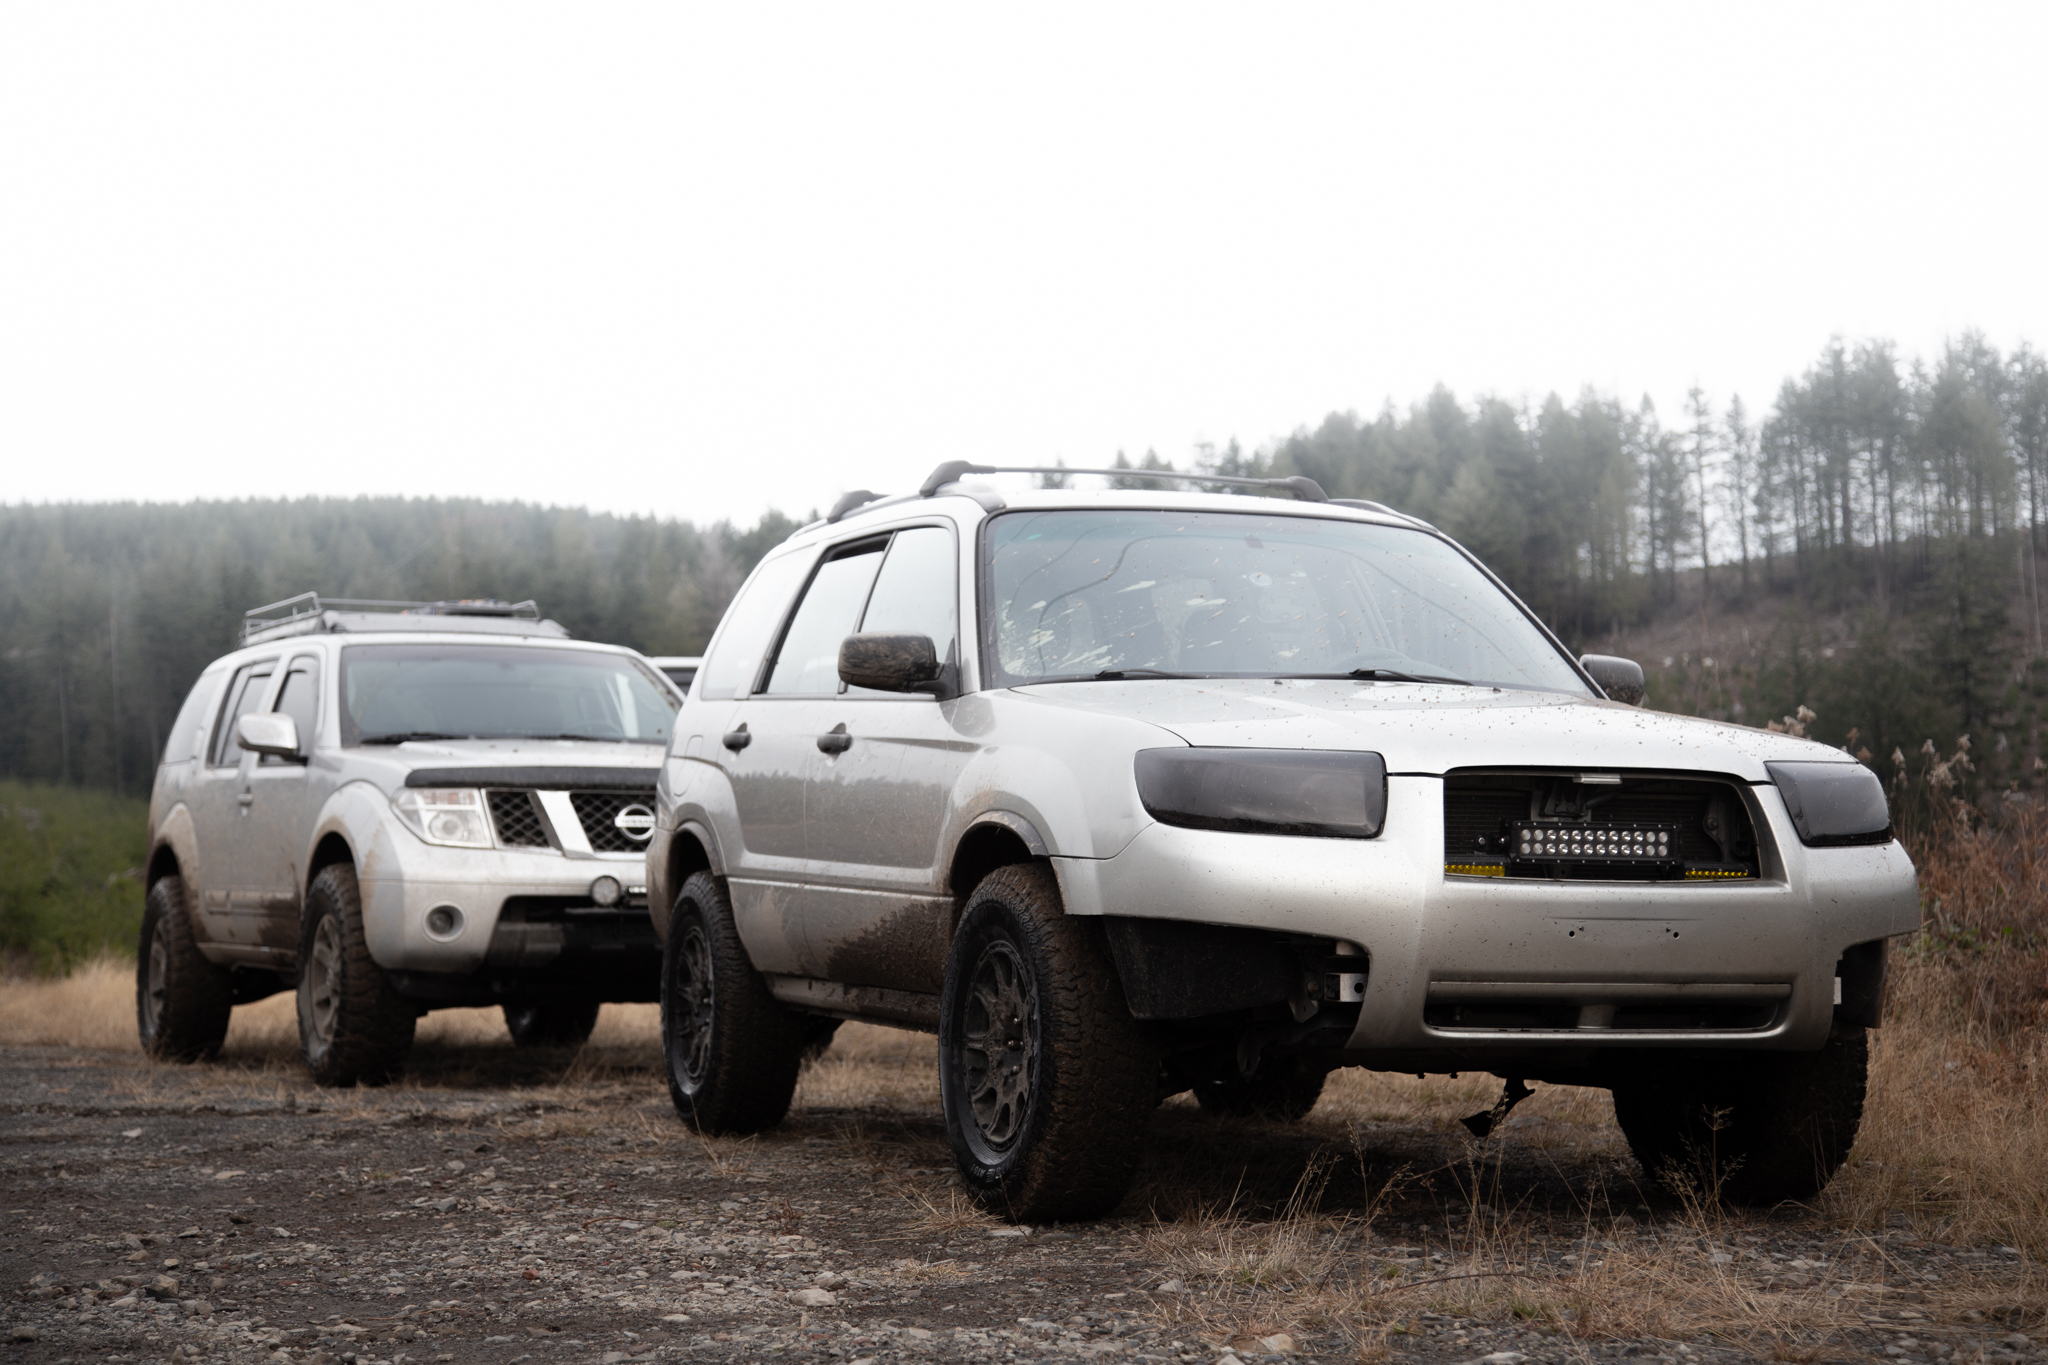 Can This Lifted 2006 Subaru Forester Keep Up With Real 4×4’s?